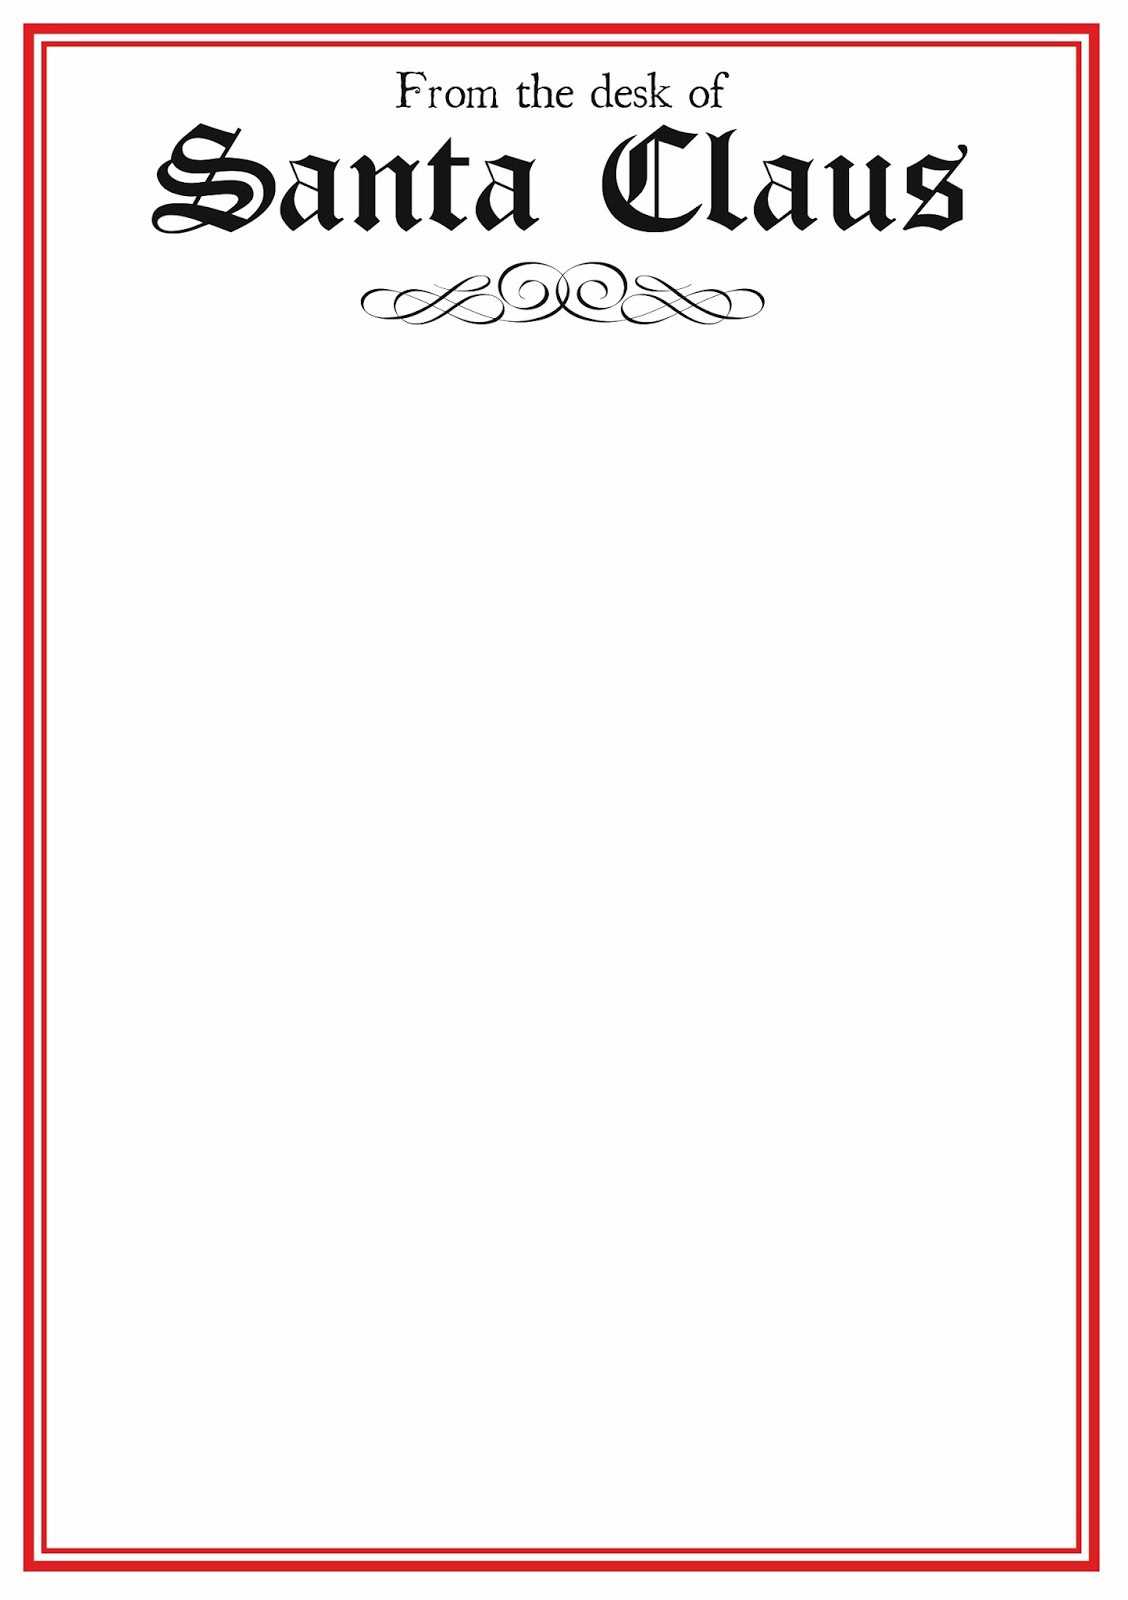 Letter To Santa Template Word - Dalep.midnightpig.co Pertaining To Letter From Santa Template Word